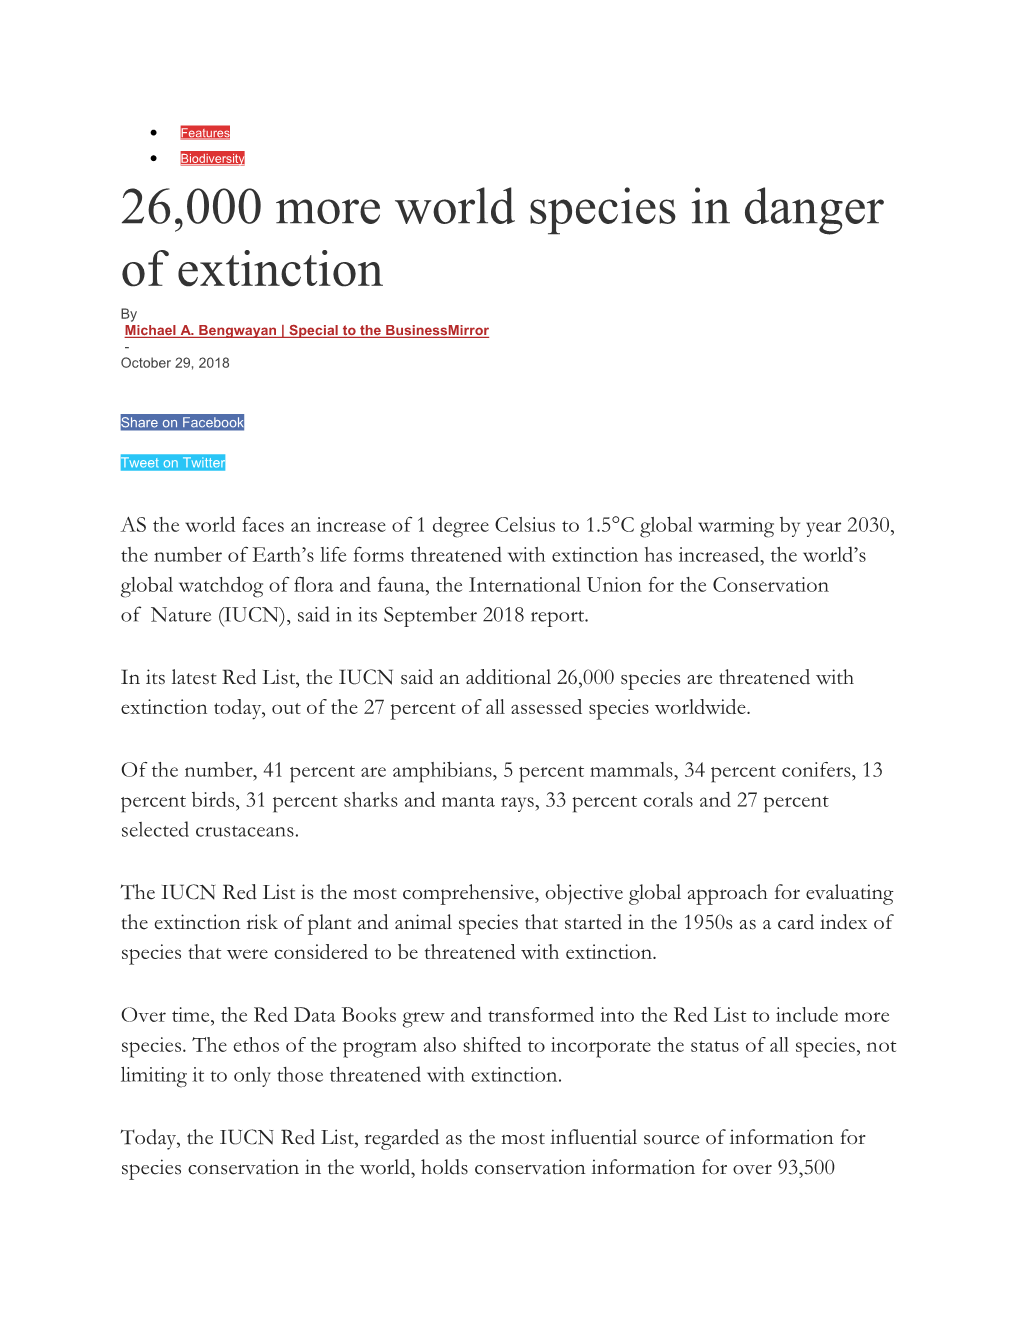 26,000 More World Species in Danger of Extinction by Michael A